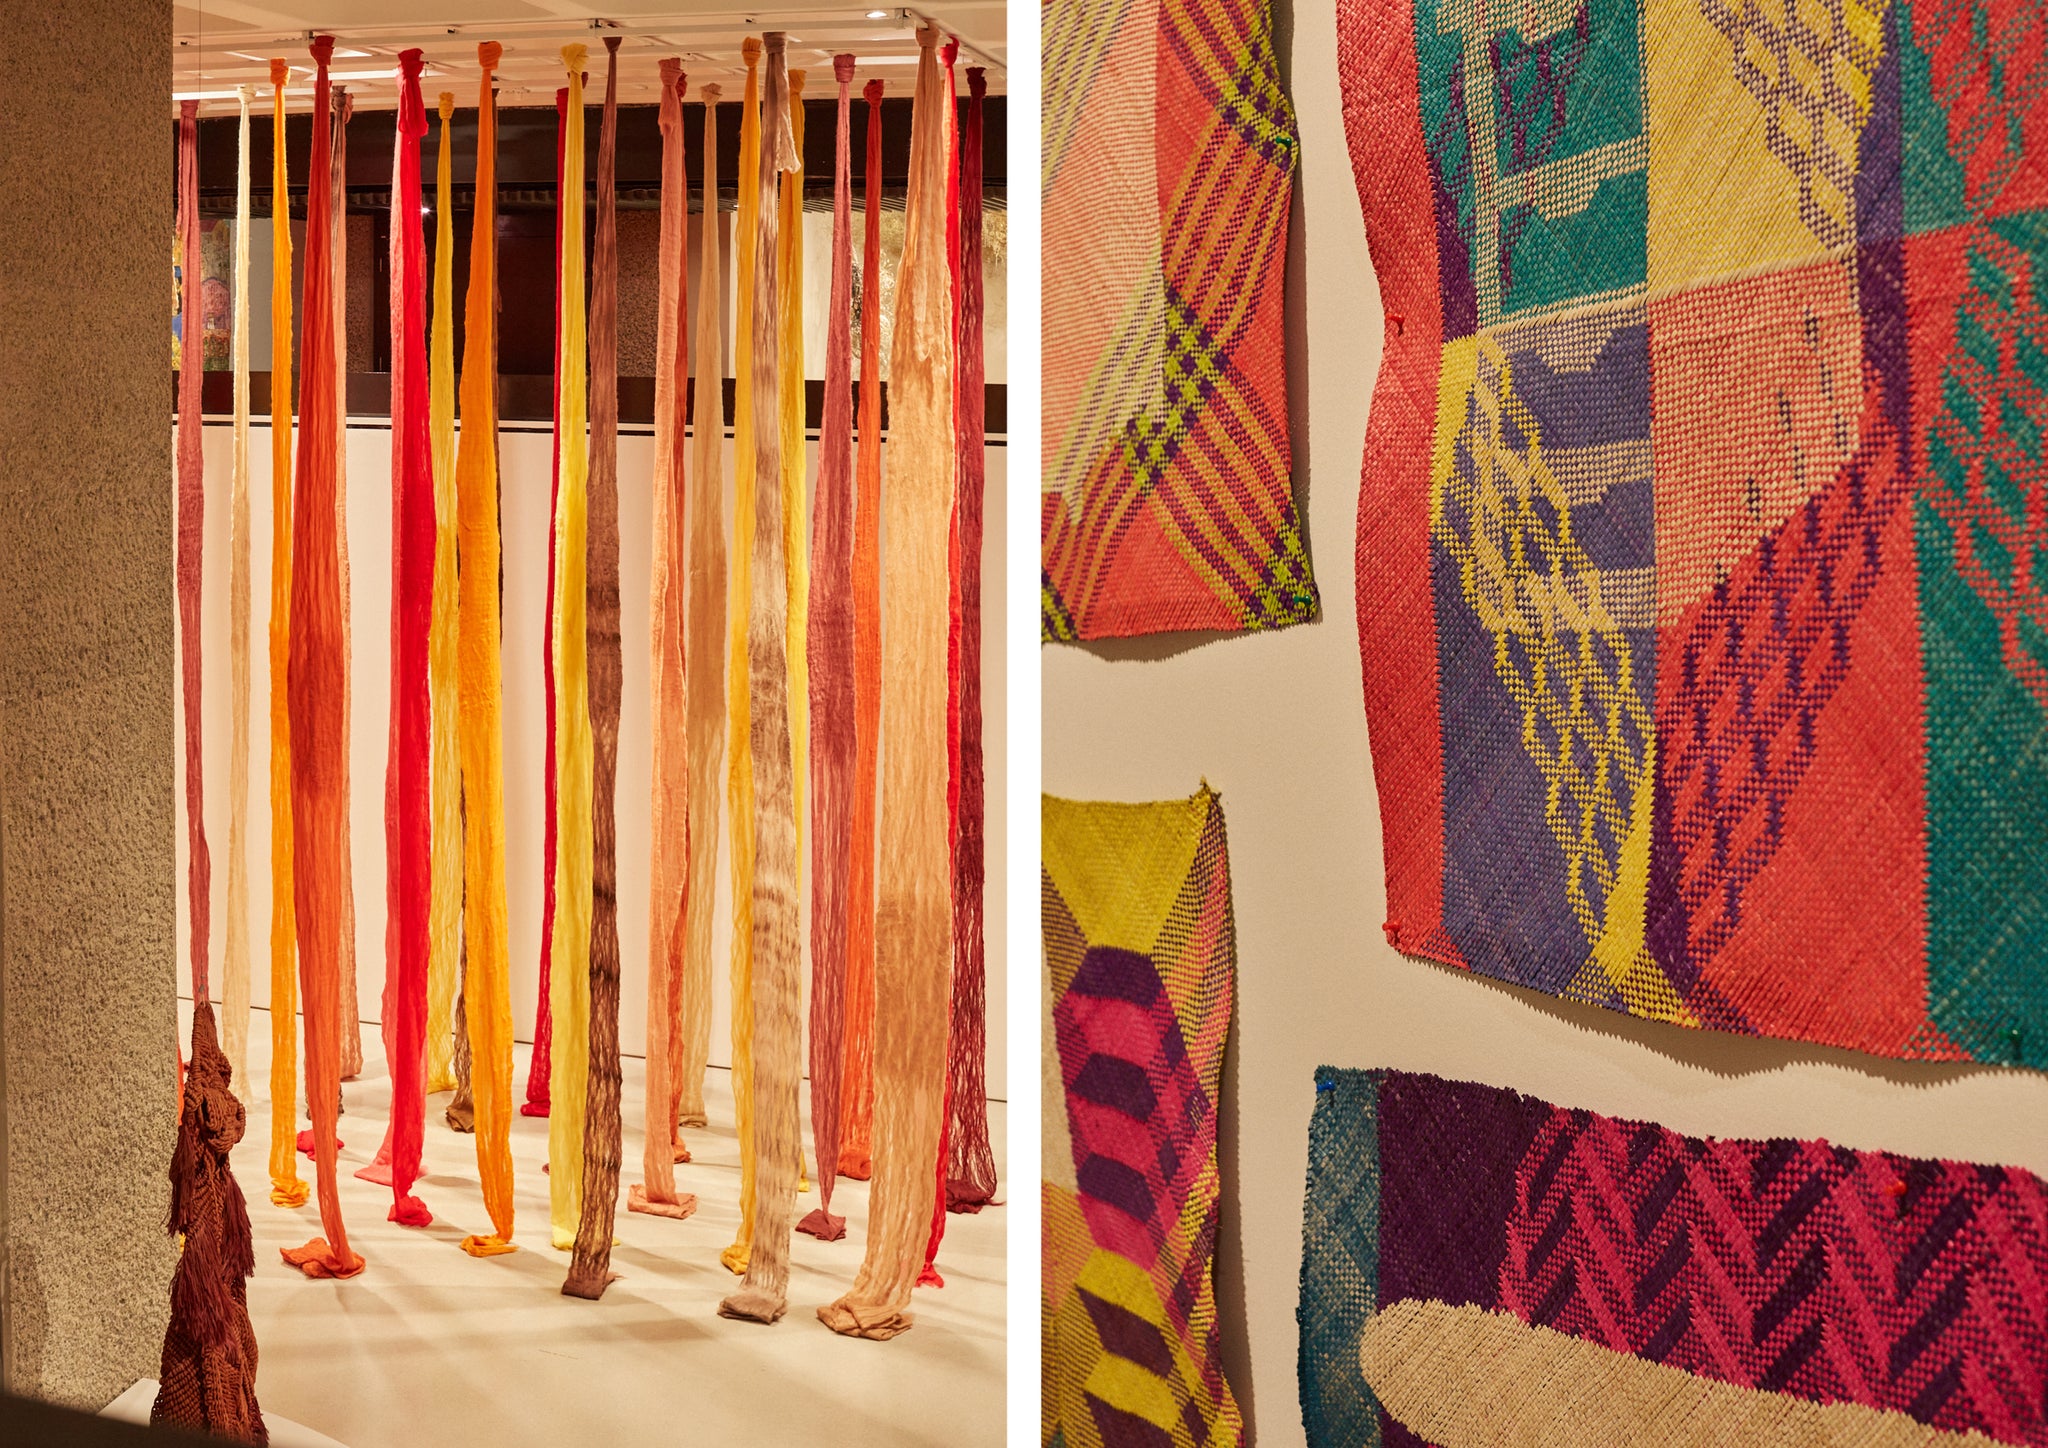 Colourful textiles in a gallery setting.